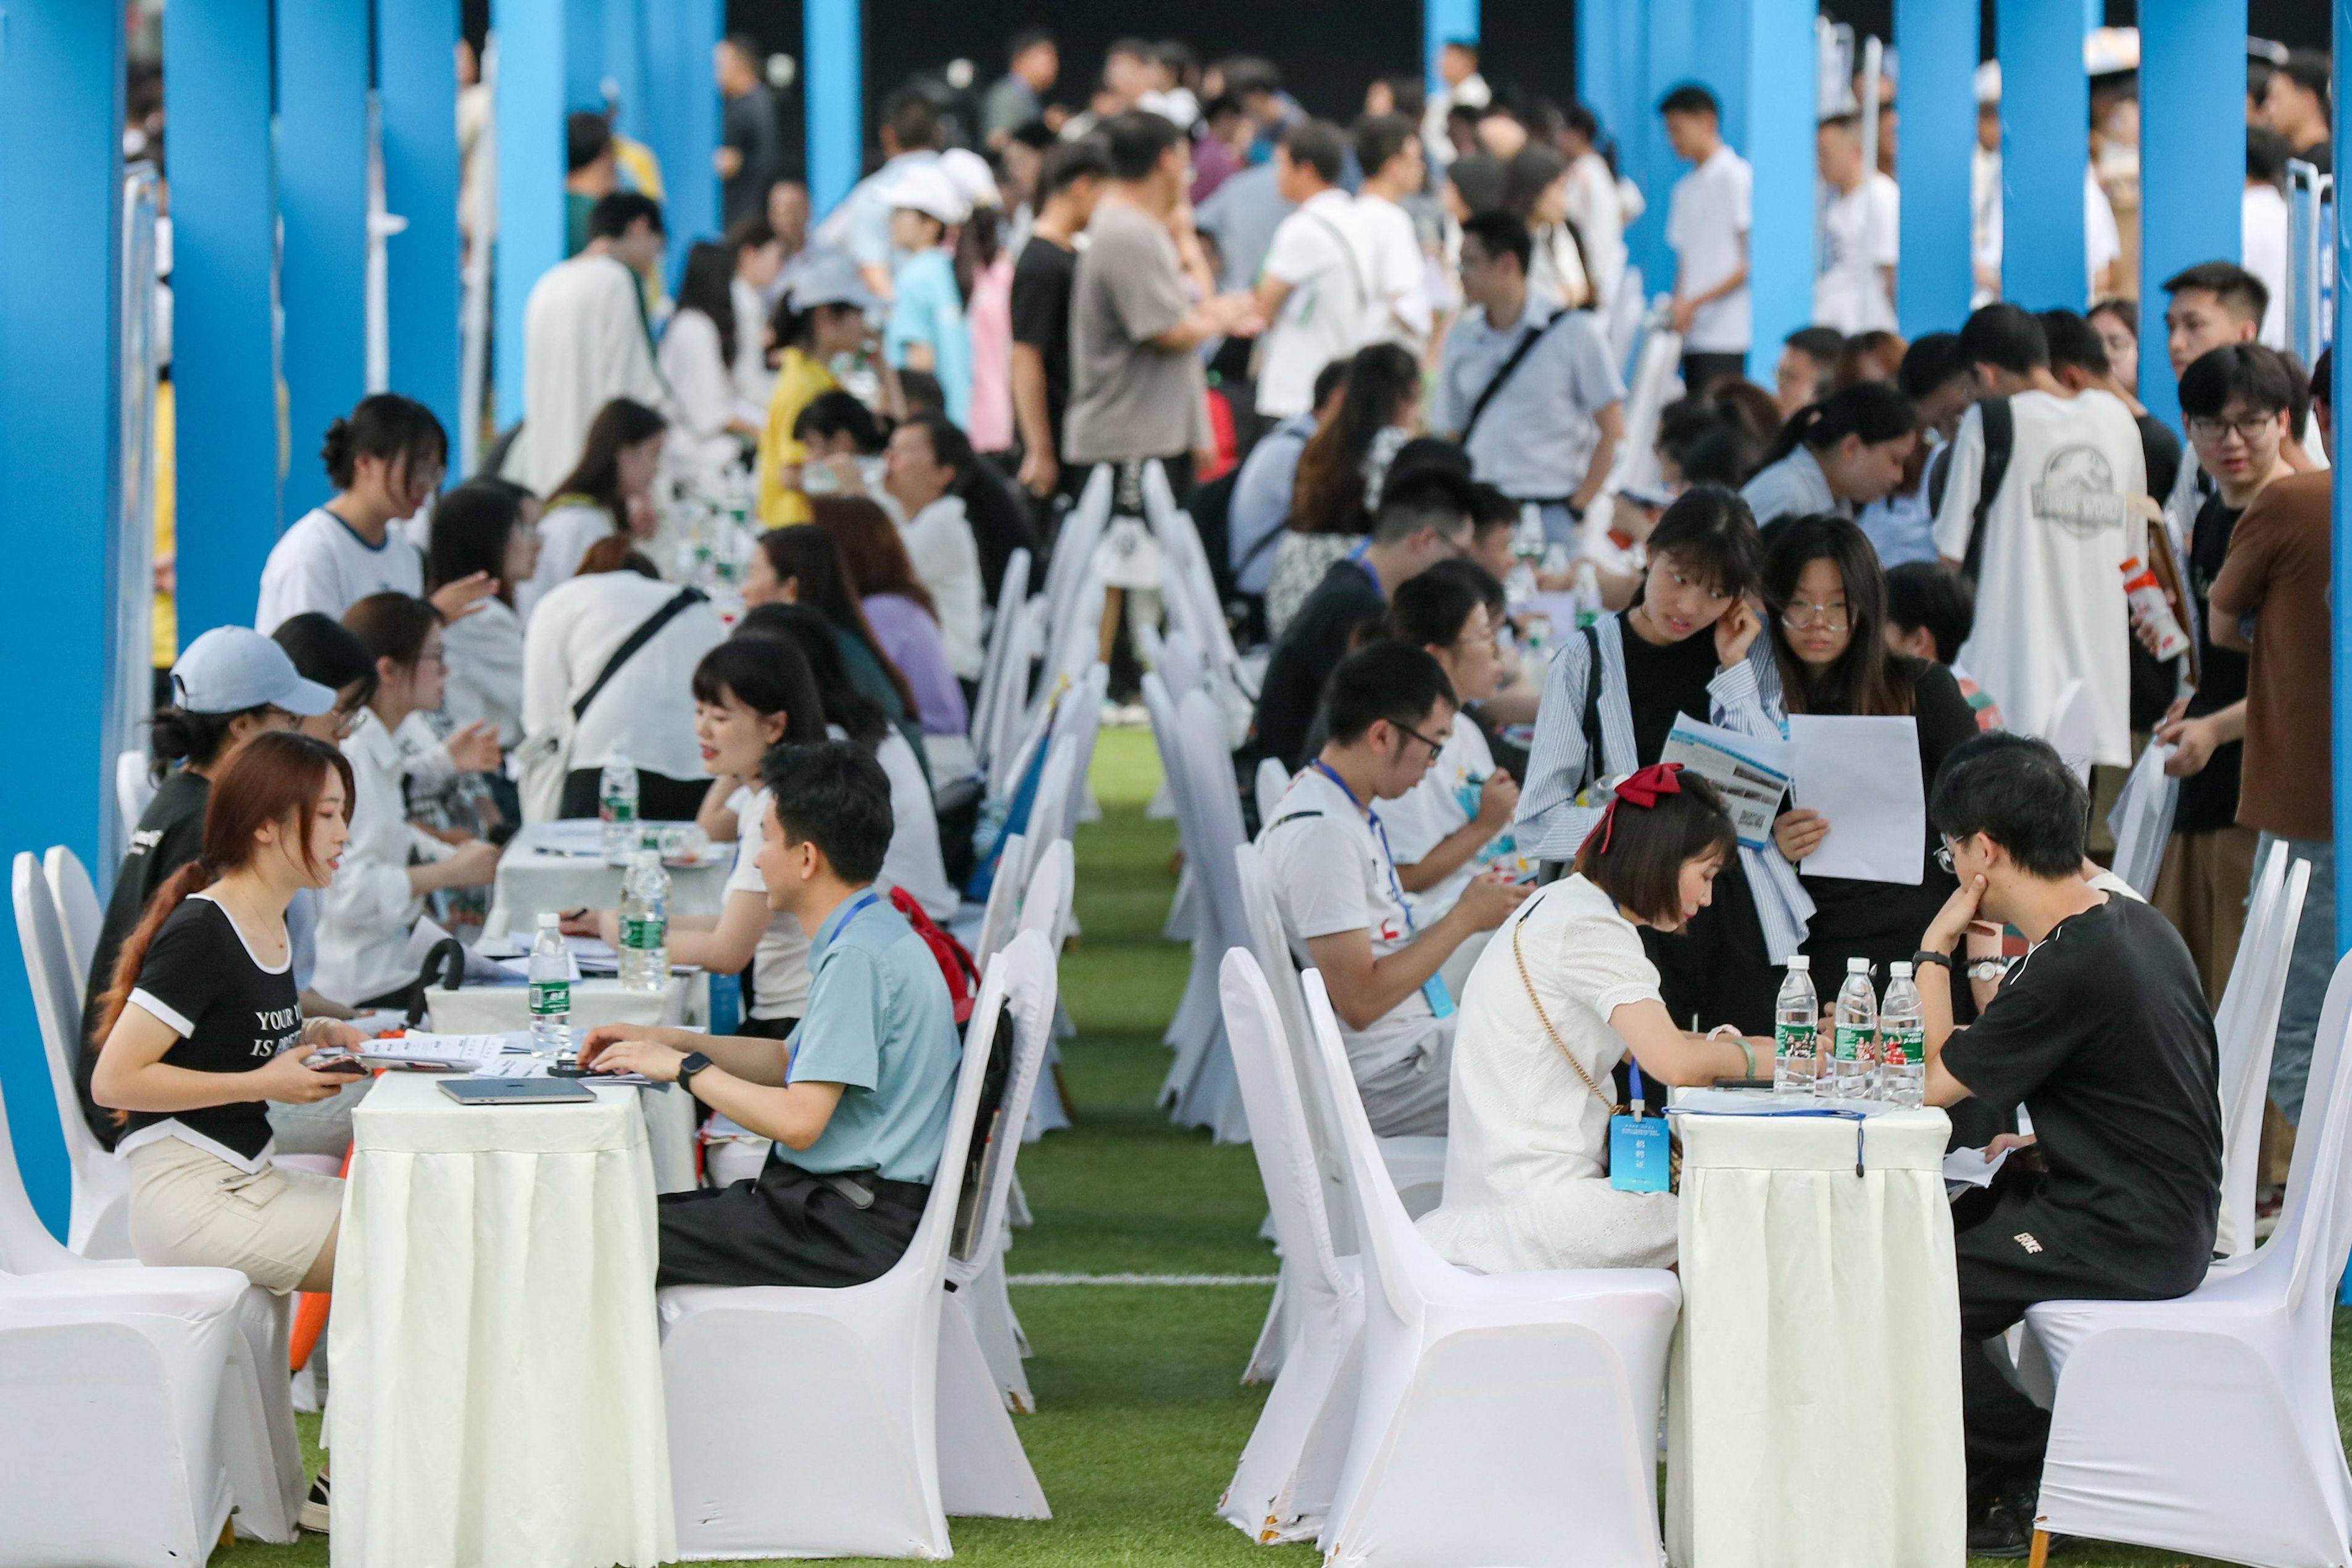 Students attend a job fair in Sichuan province in June, when China’s youth unemployment rate reached 21.3 per cent. Photo: AFP